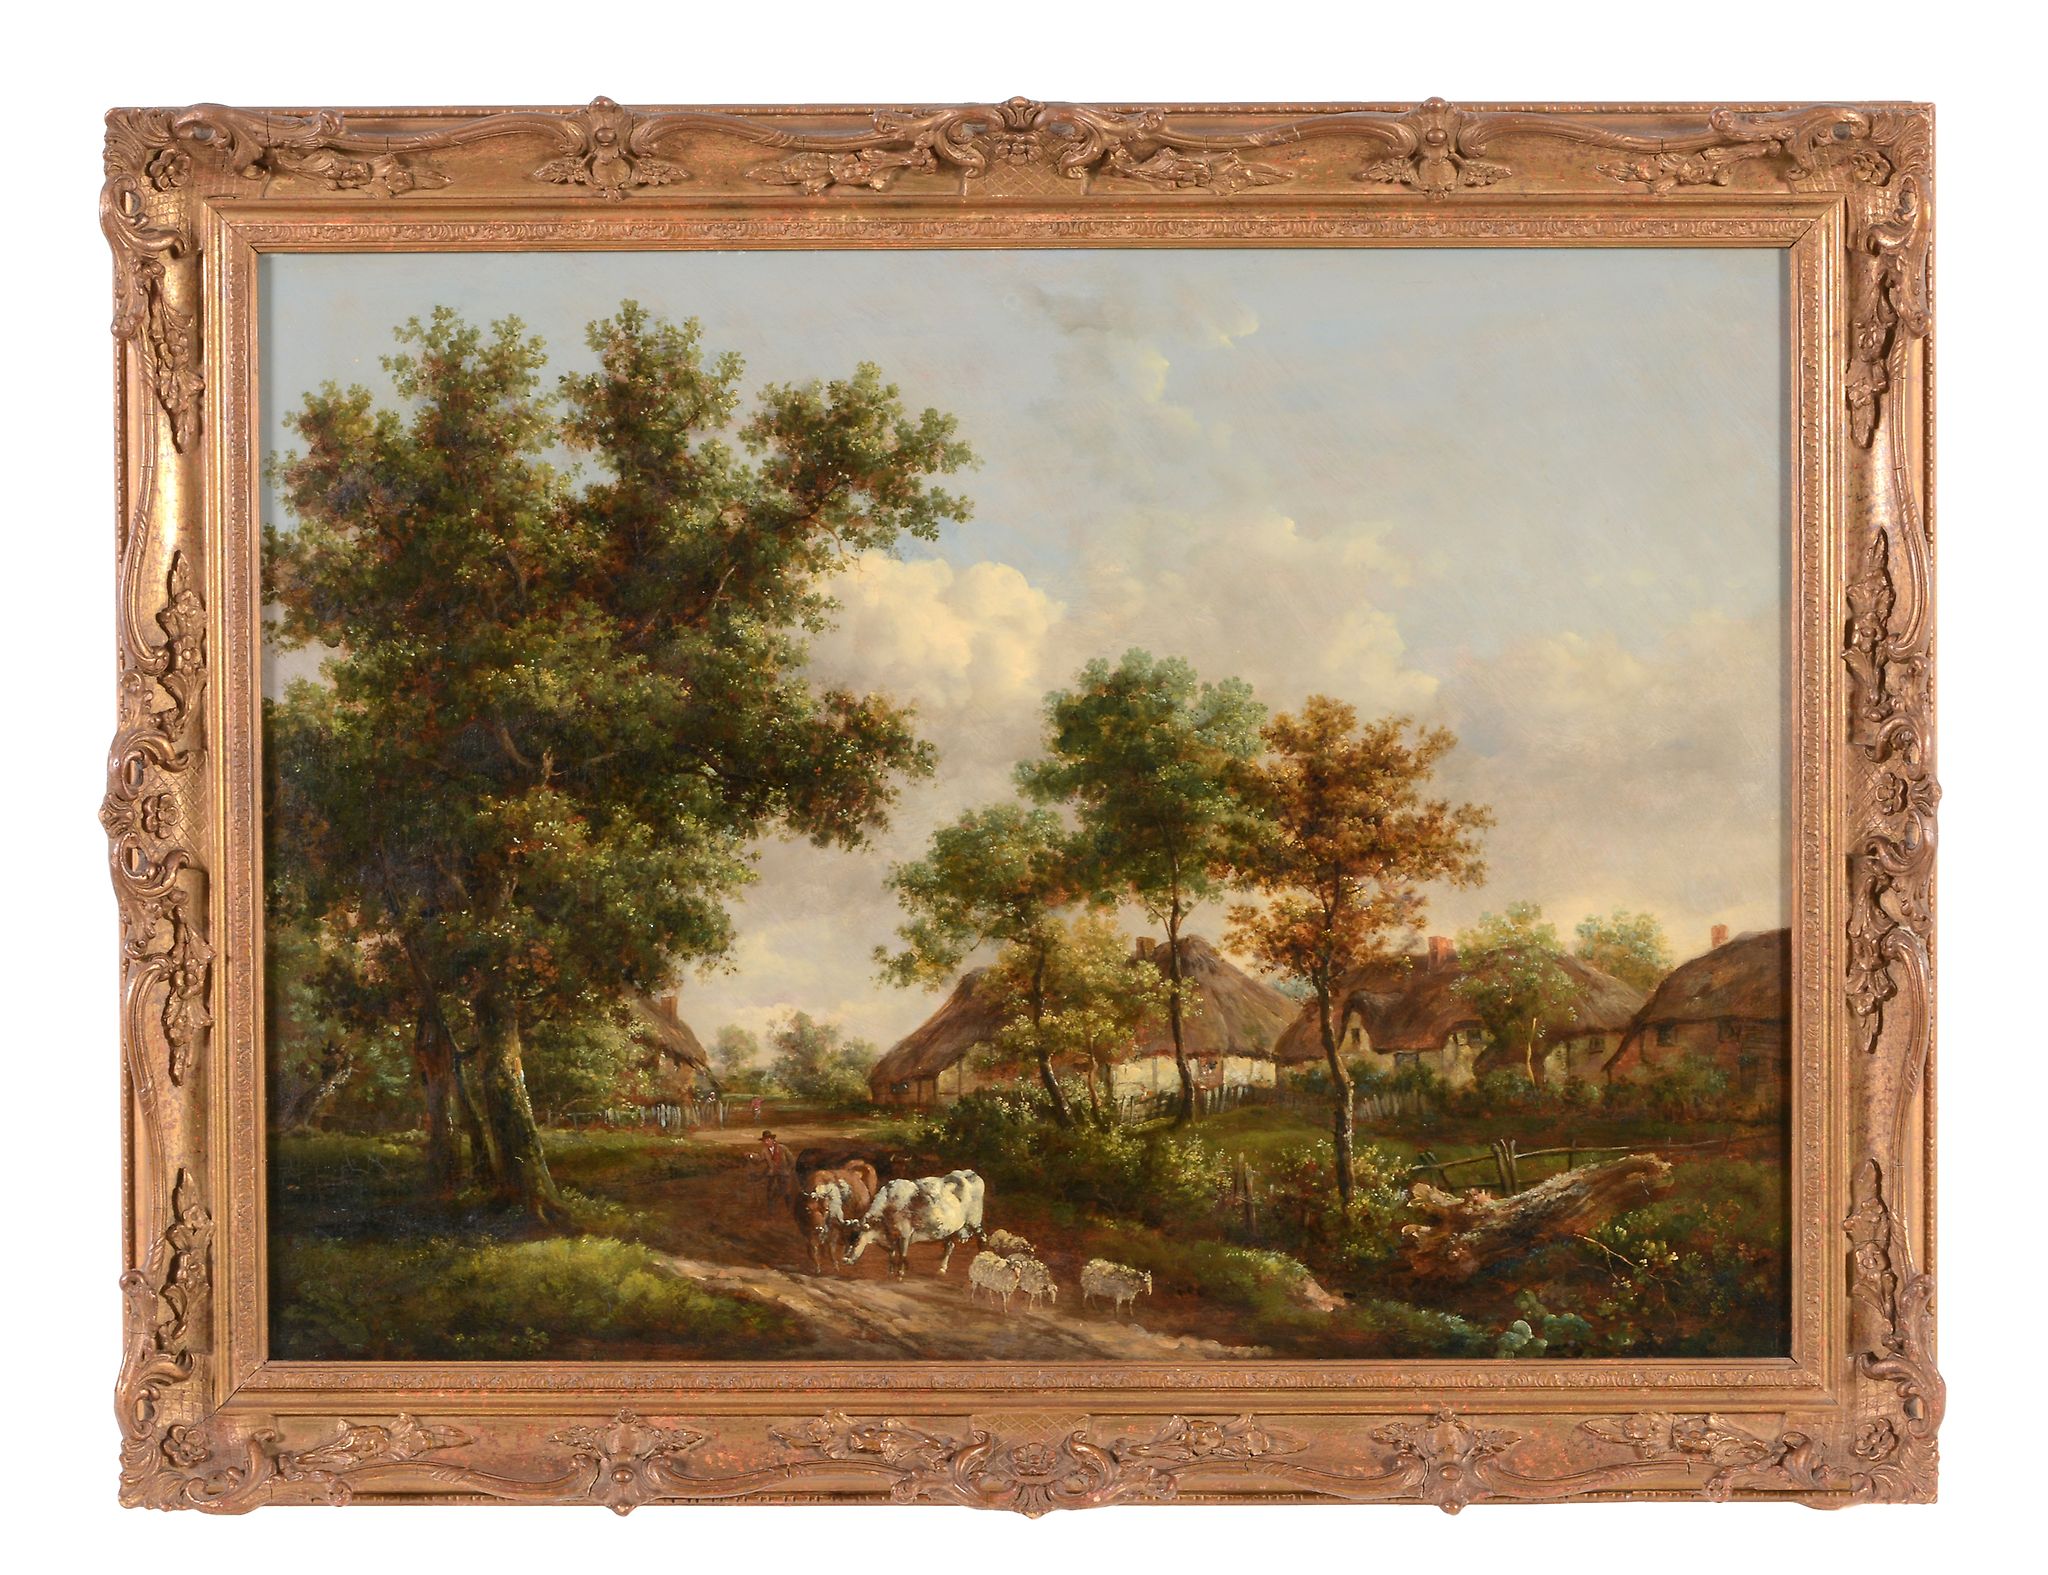 Charles Towne (1763-1840) - Cattle drover in a pastoral landscape with thatched cottages beyond  Oil - Image 2 of 3